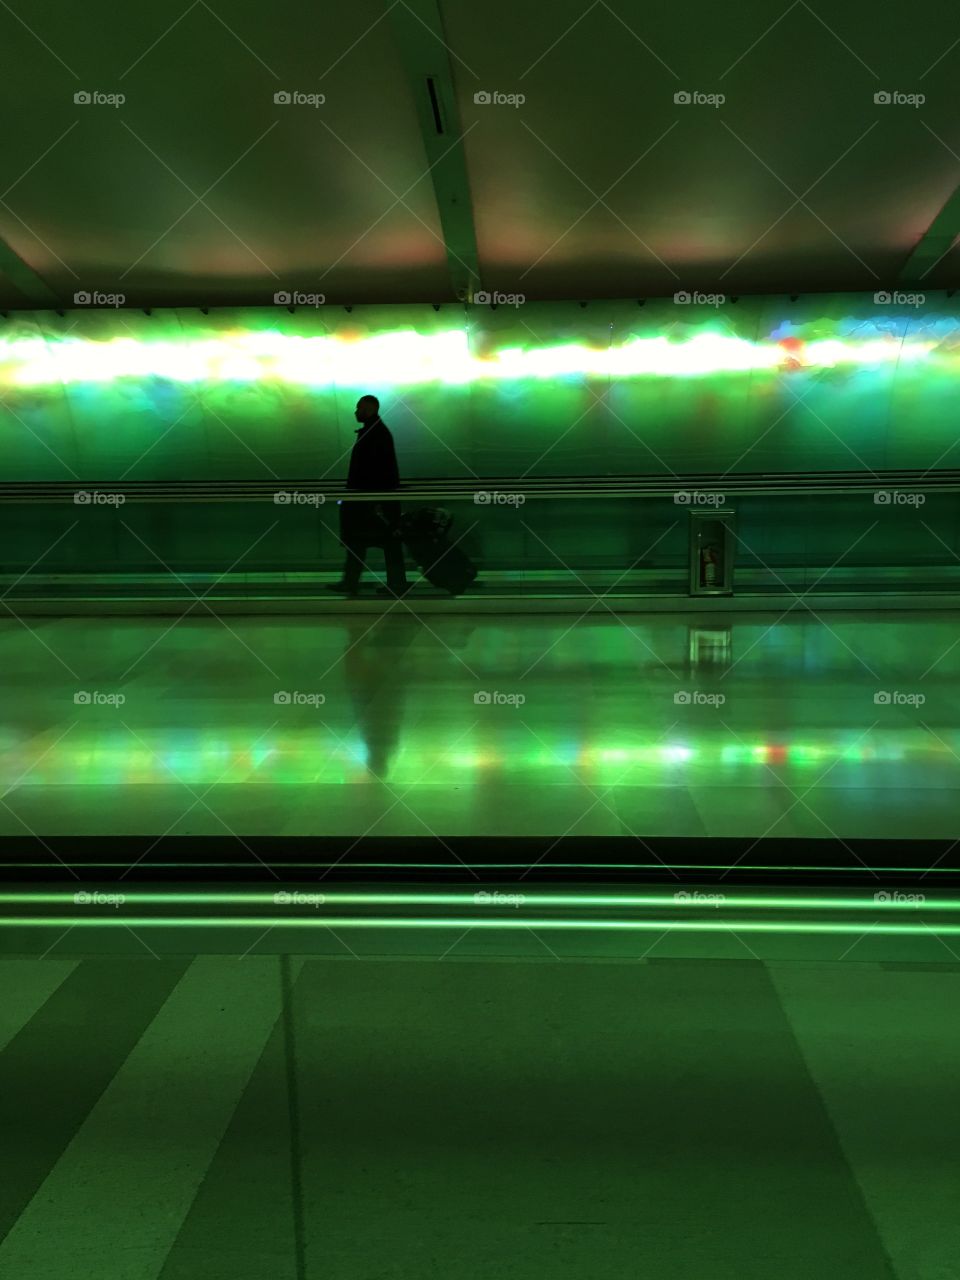 Detroit airport has the coolest lights, creating an awesome silhouette of travelers 